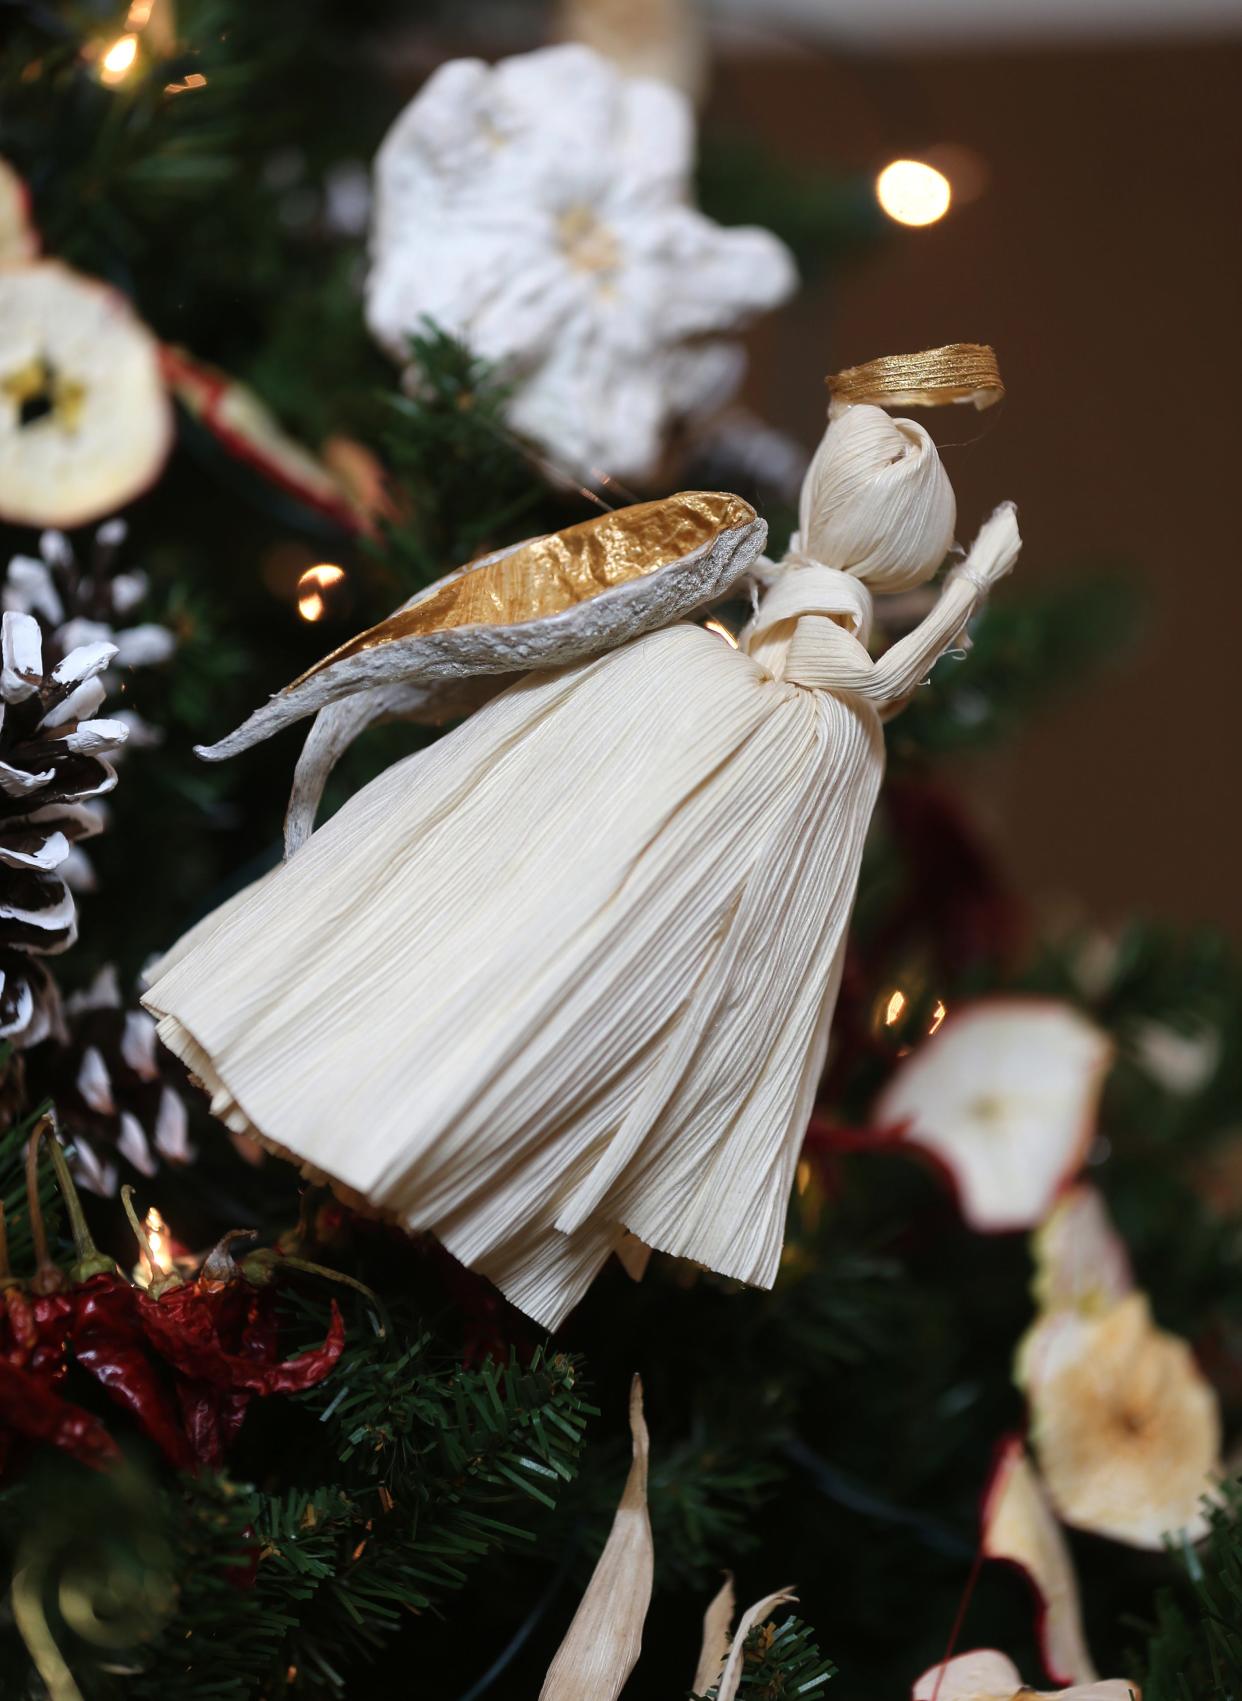 Angel ornaments at the St. Francis Convent are made from corn husks, and their wings are milkweed pods painted gold.